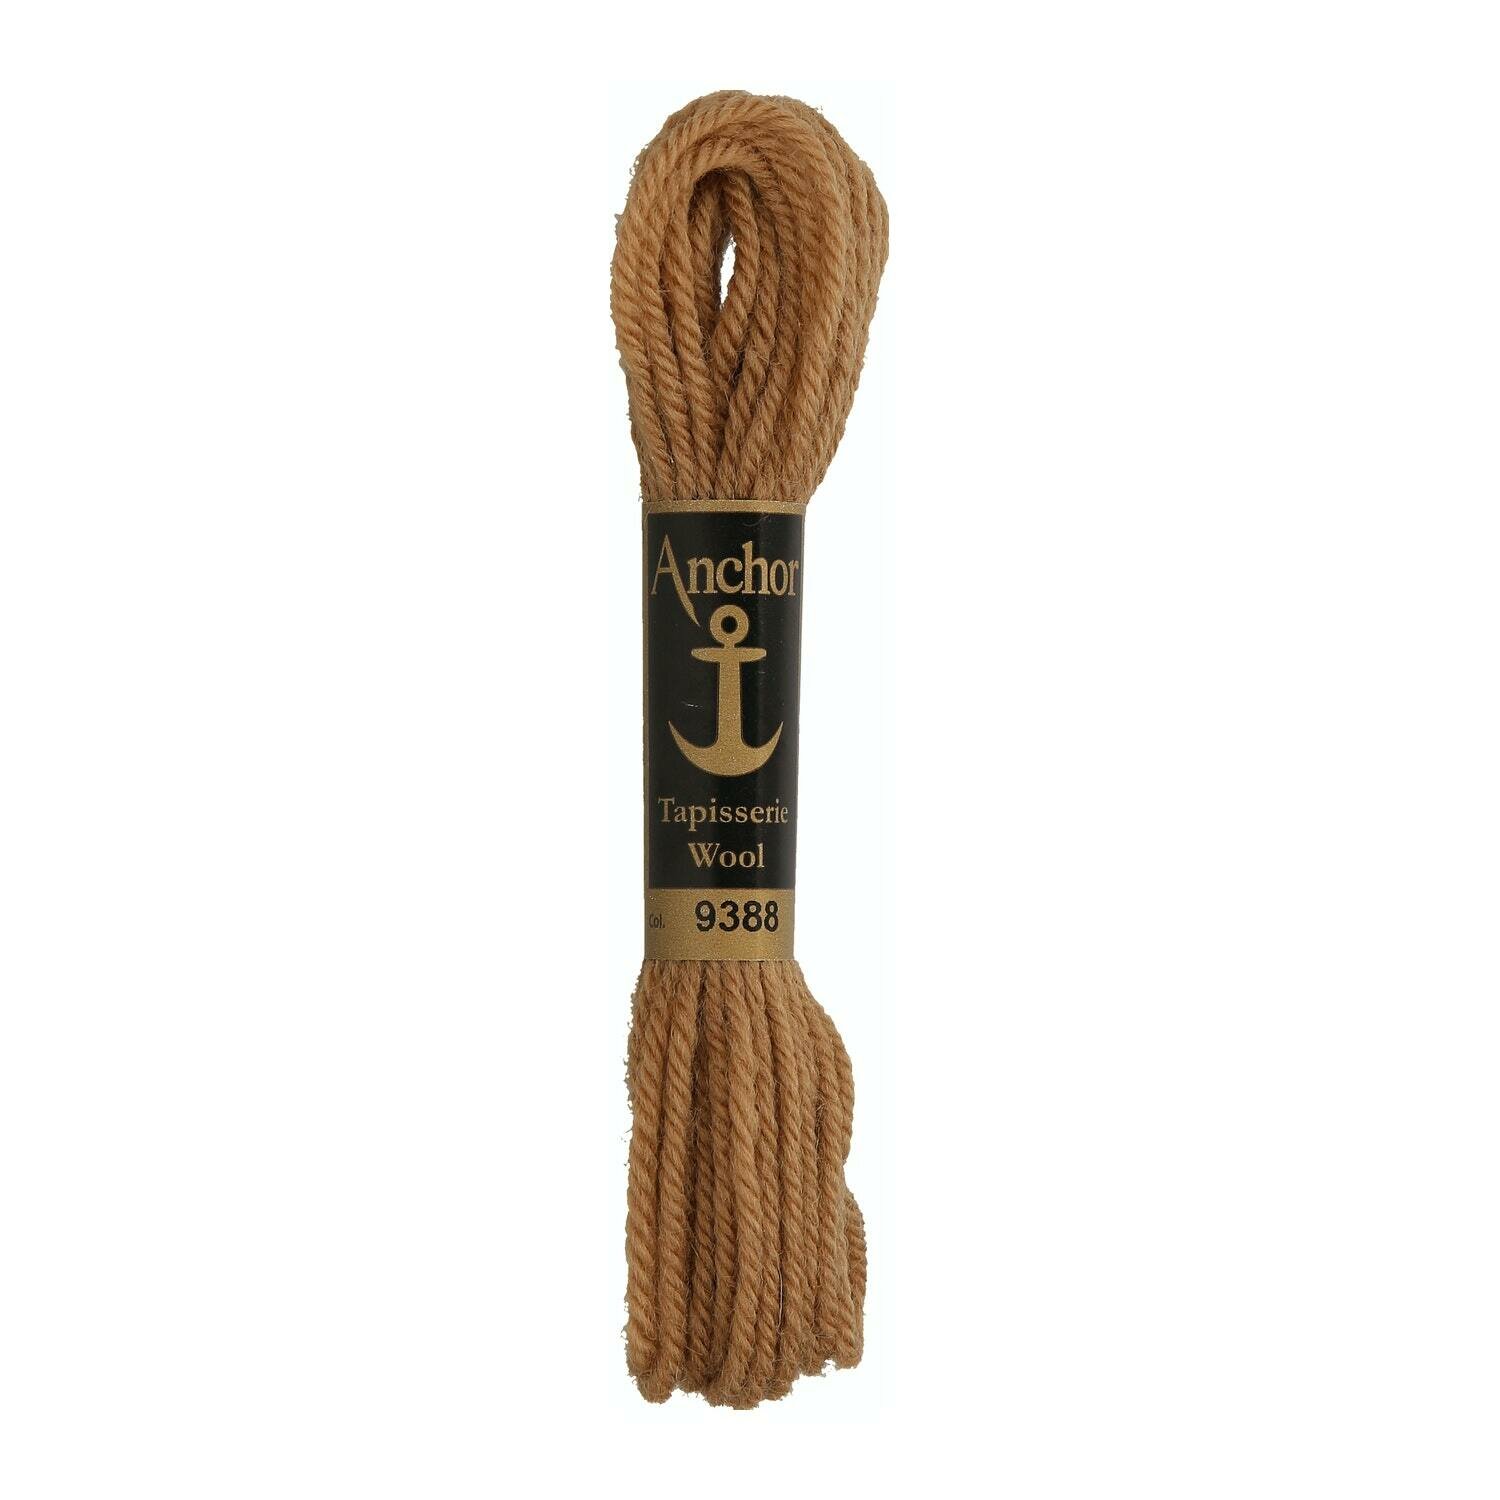 Anchor Tapisserie Wool # 09388